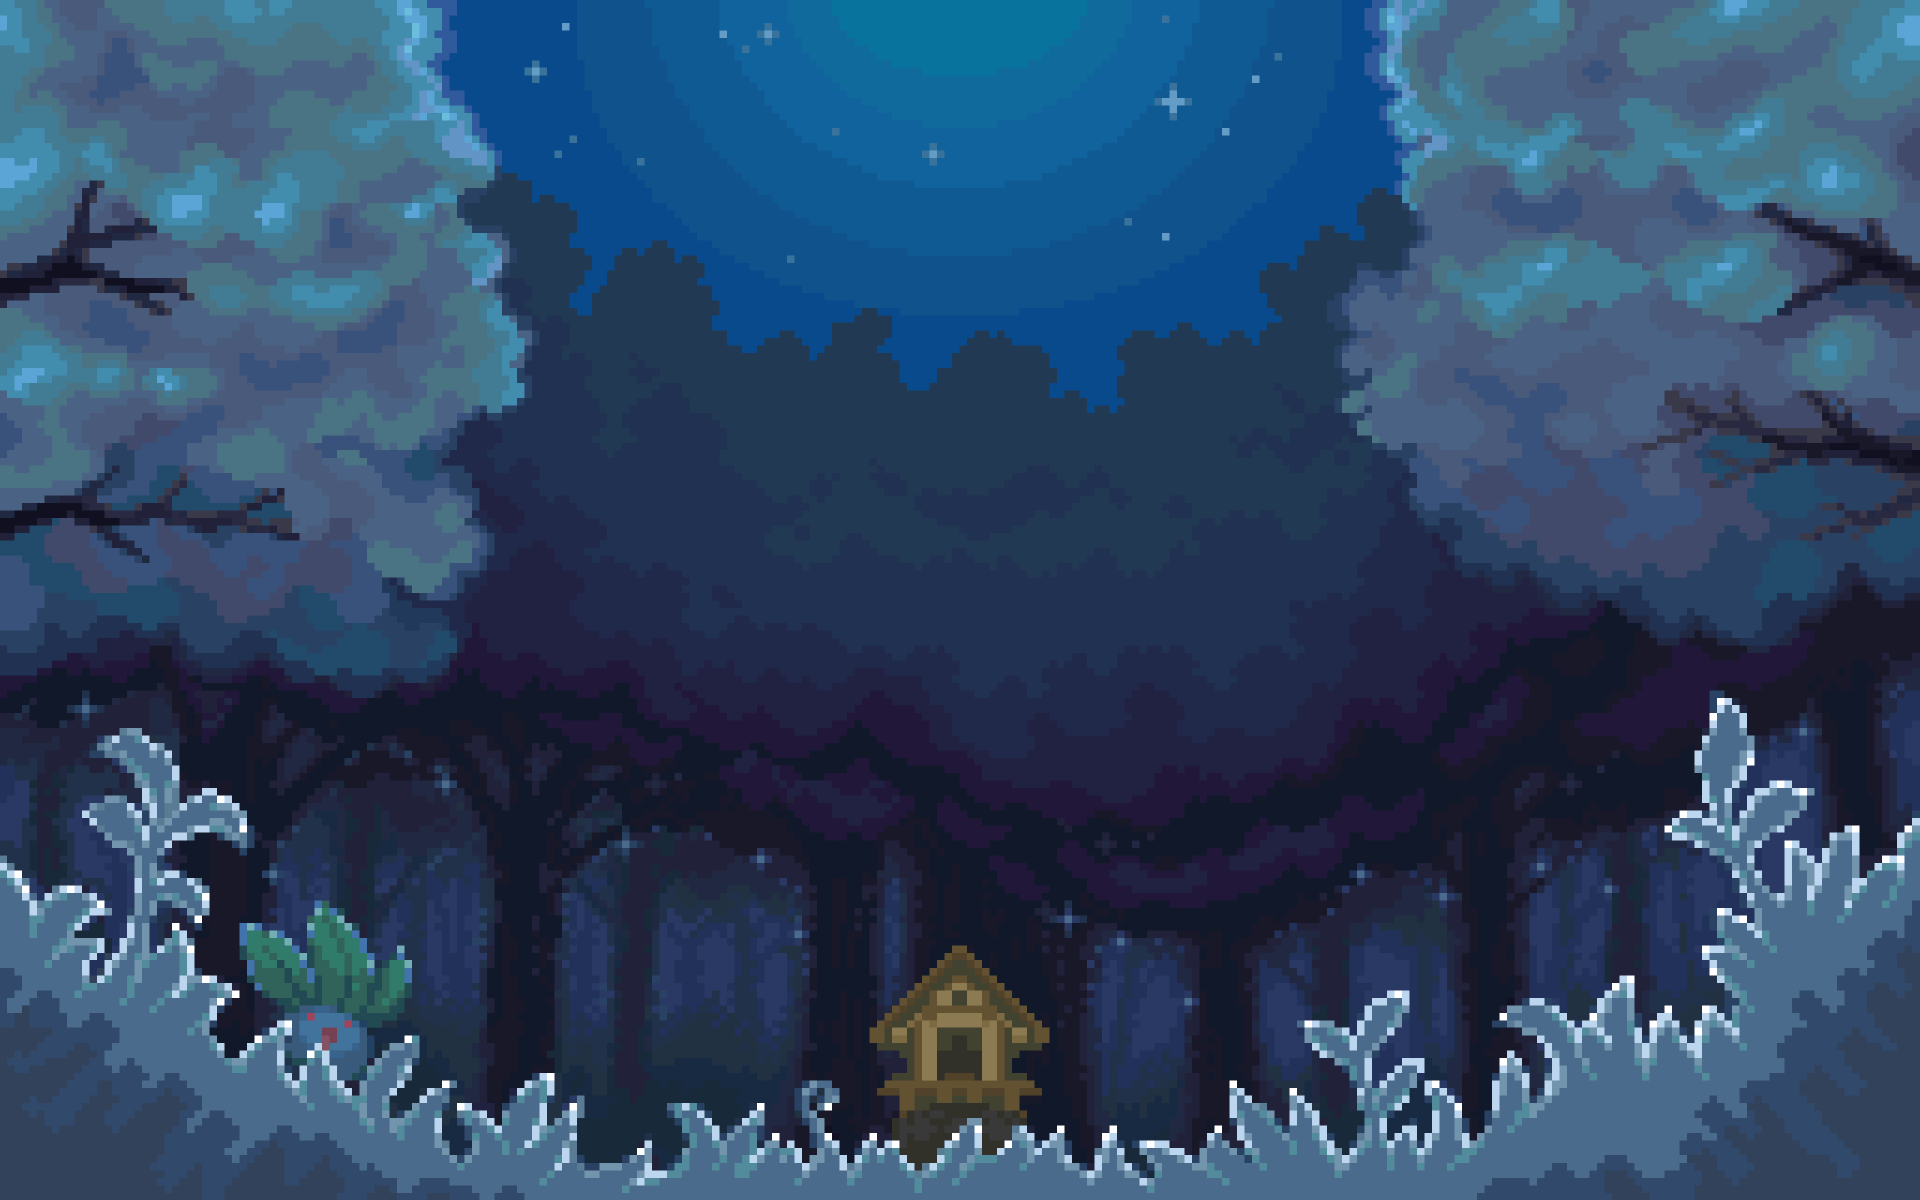 Pixel Art Background Gif 1920X1080 : View, download, rate, and comment